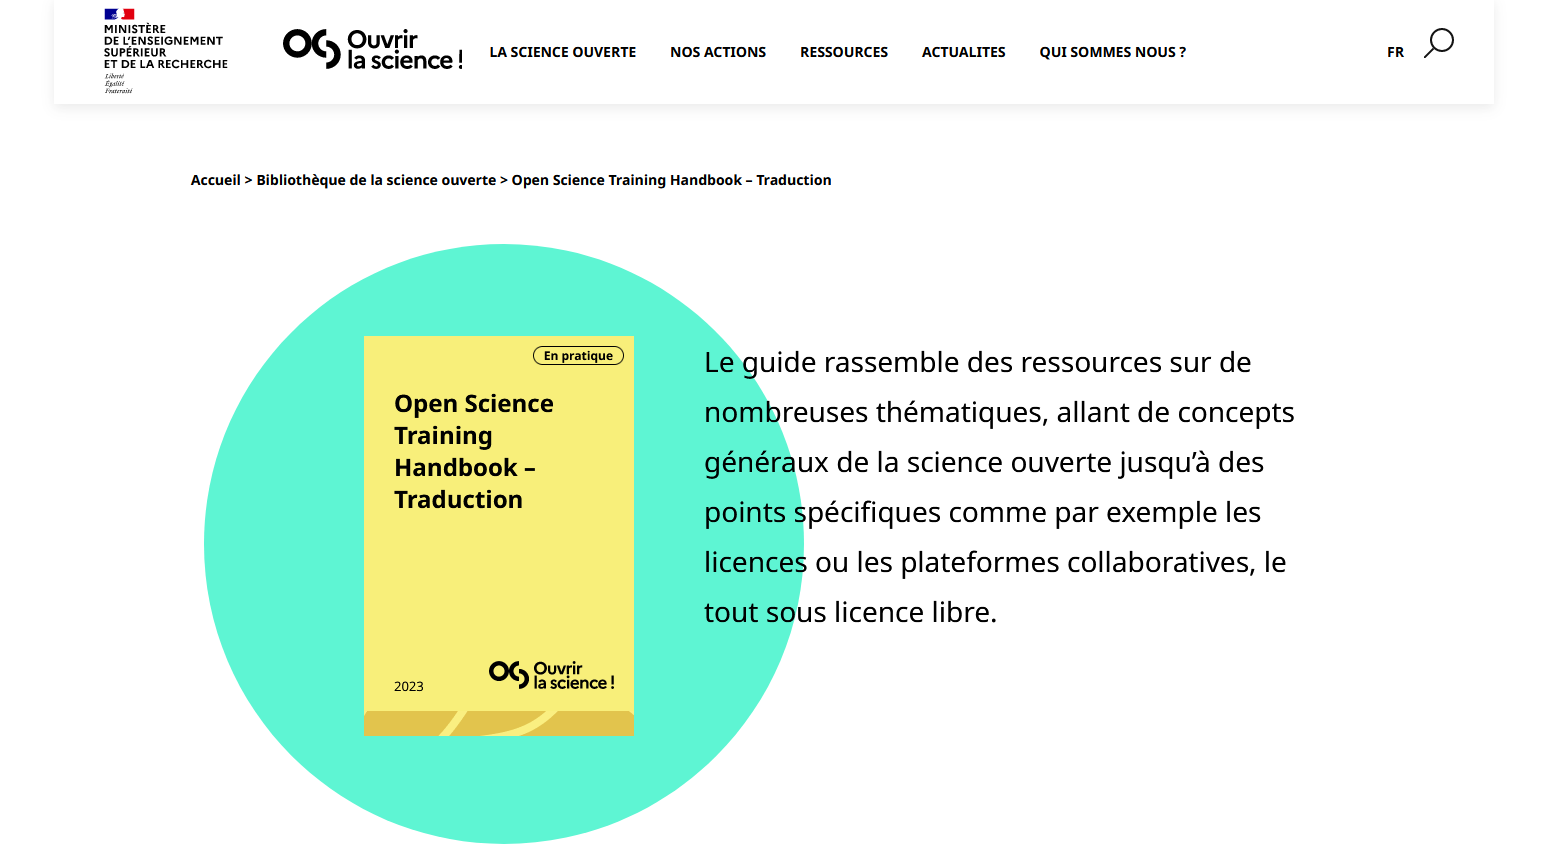 PUBLIER2023 71 COSO OPEN SCIENCE TRAINING